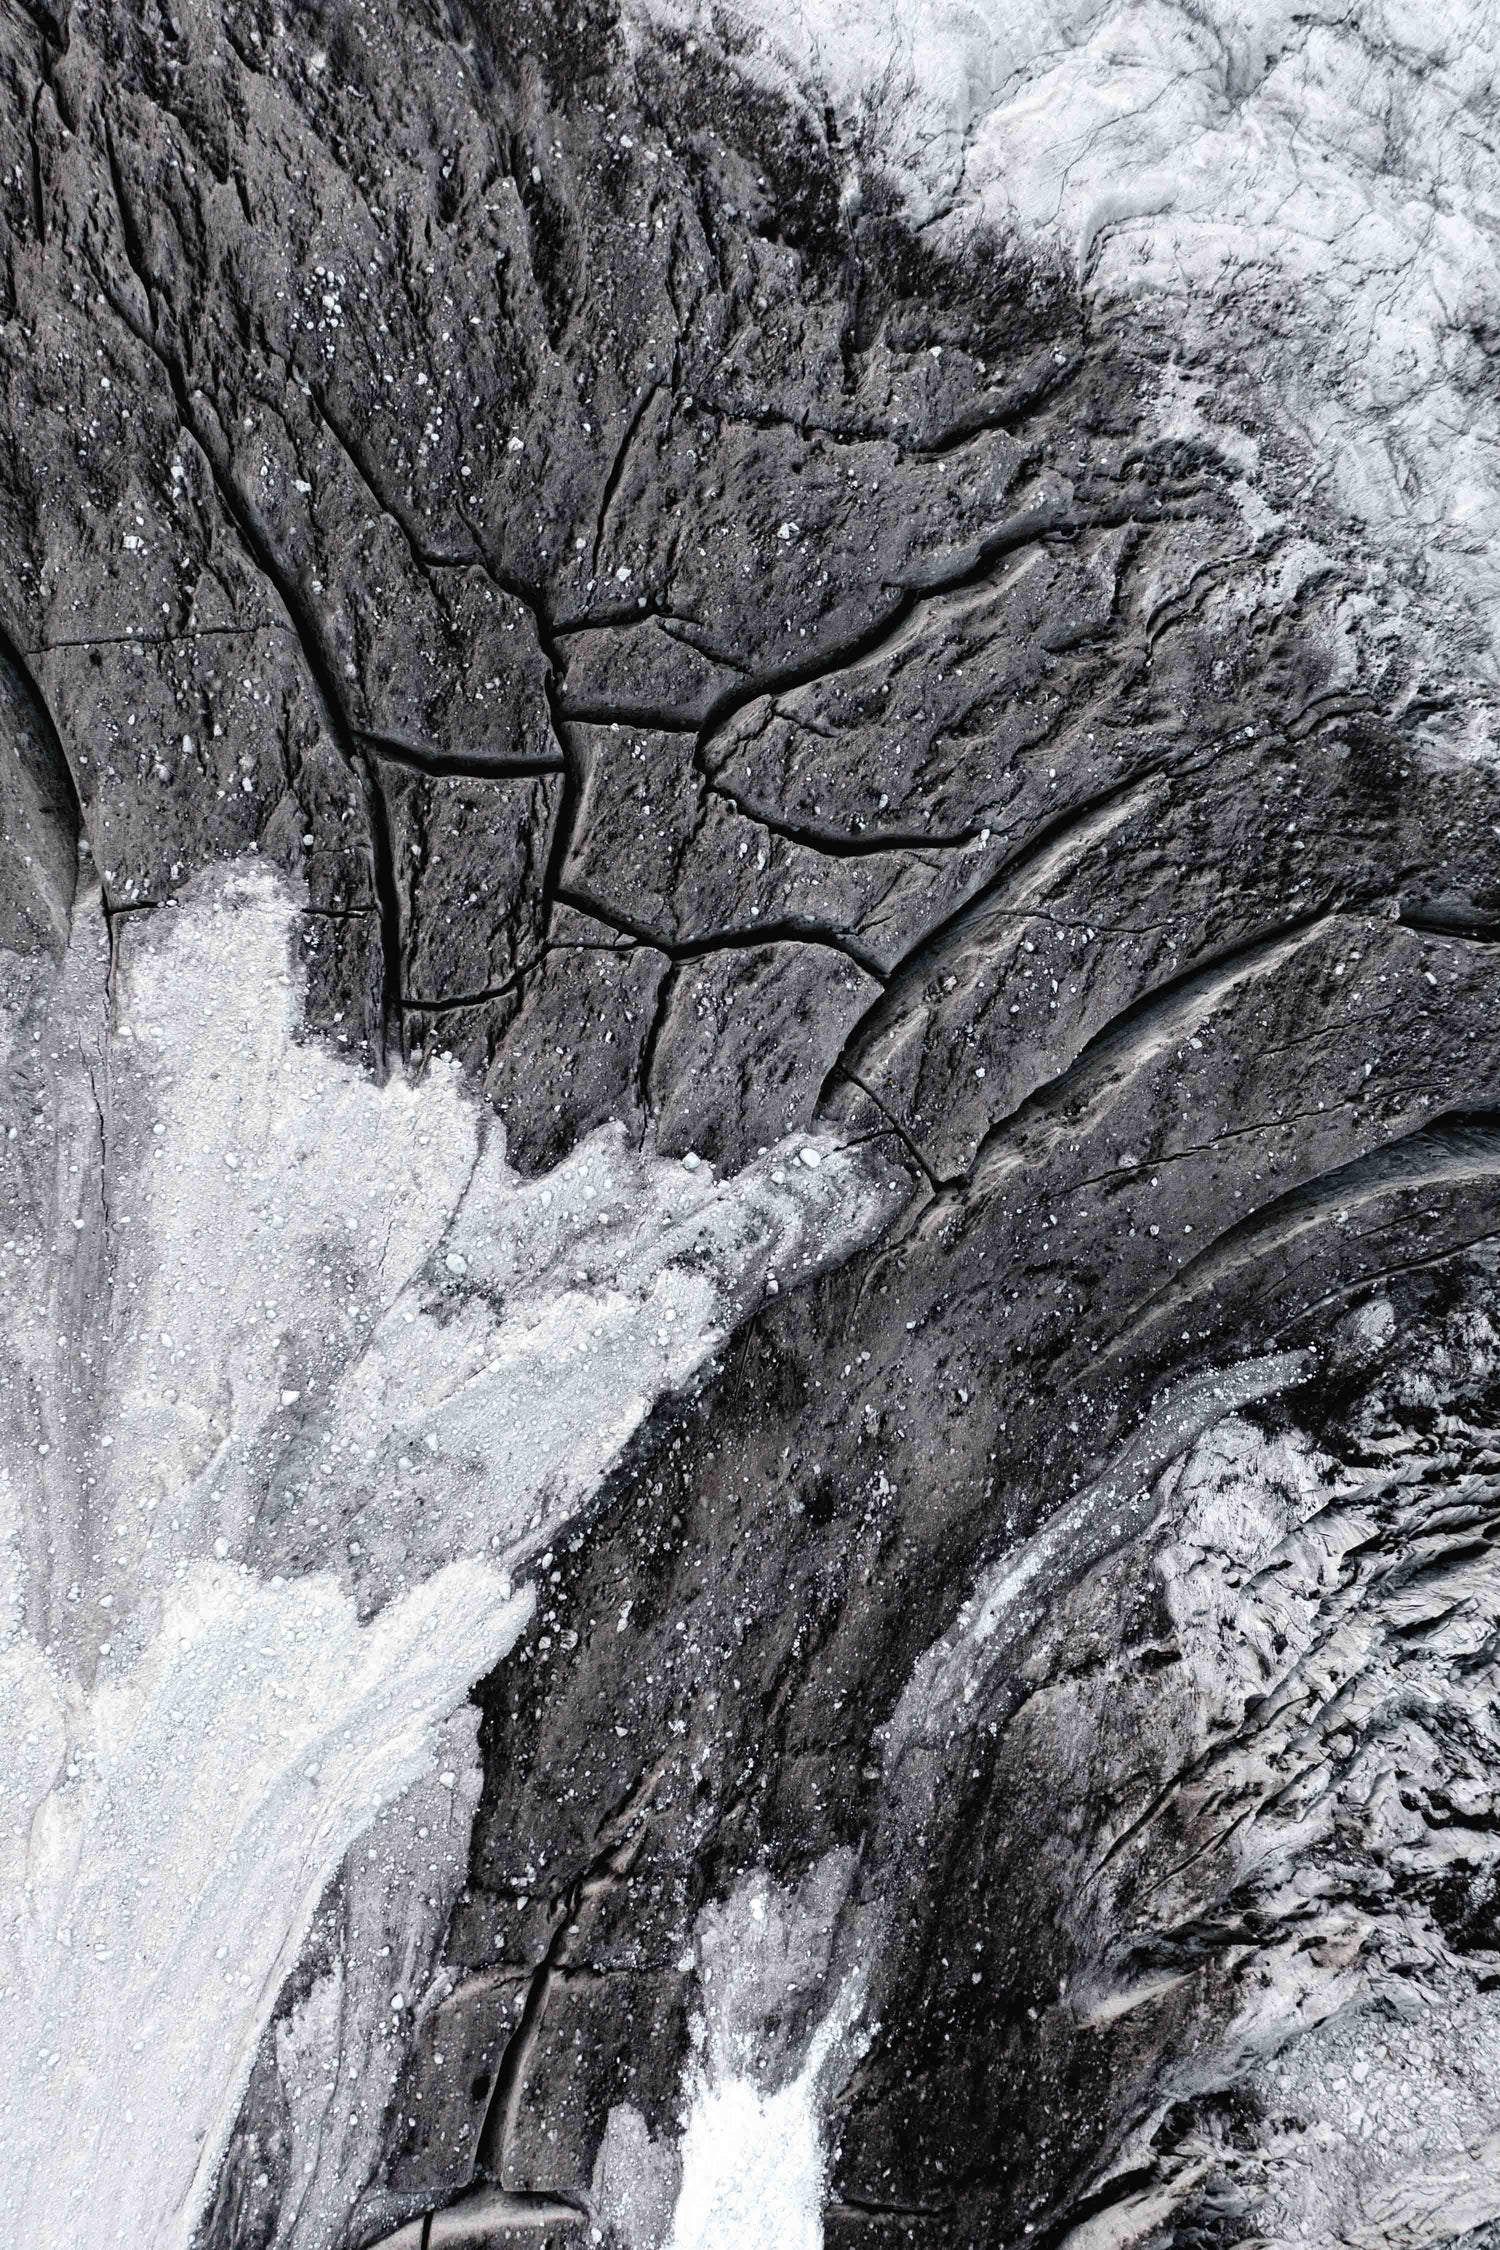 Rocks and ice create glacial patterns